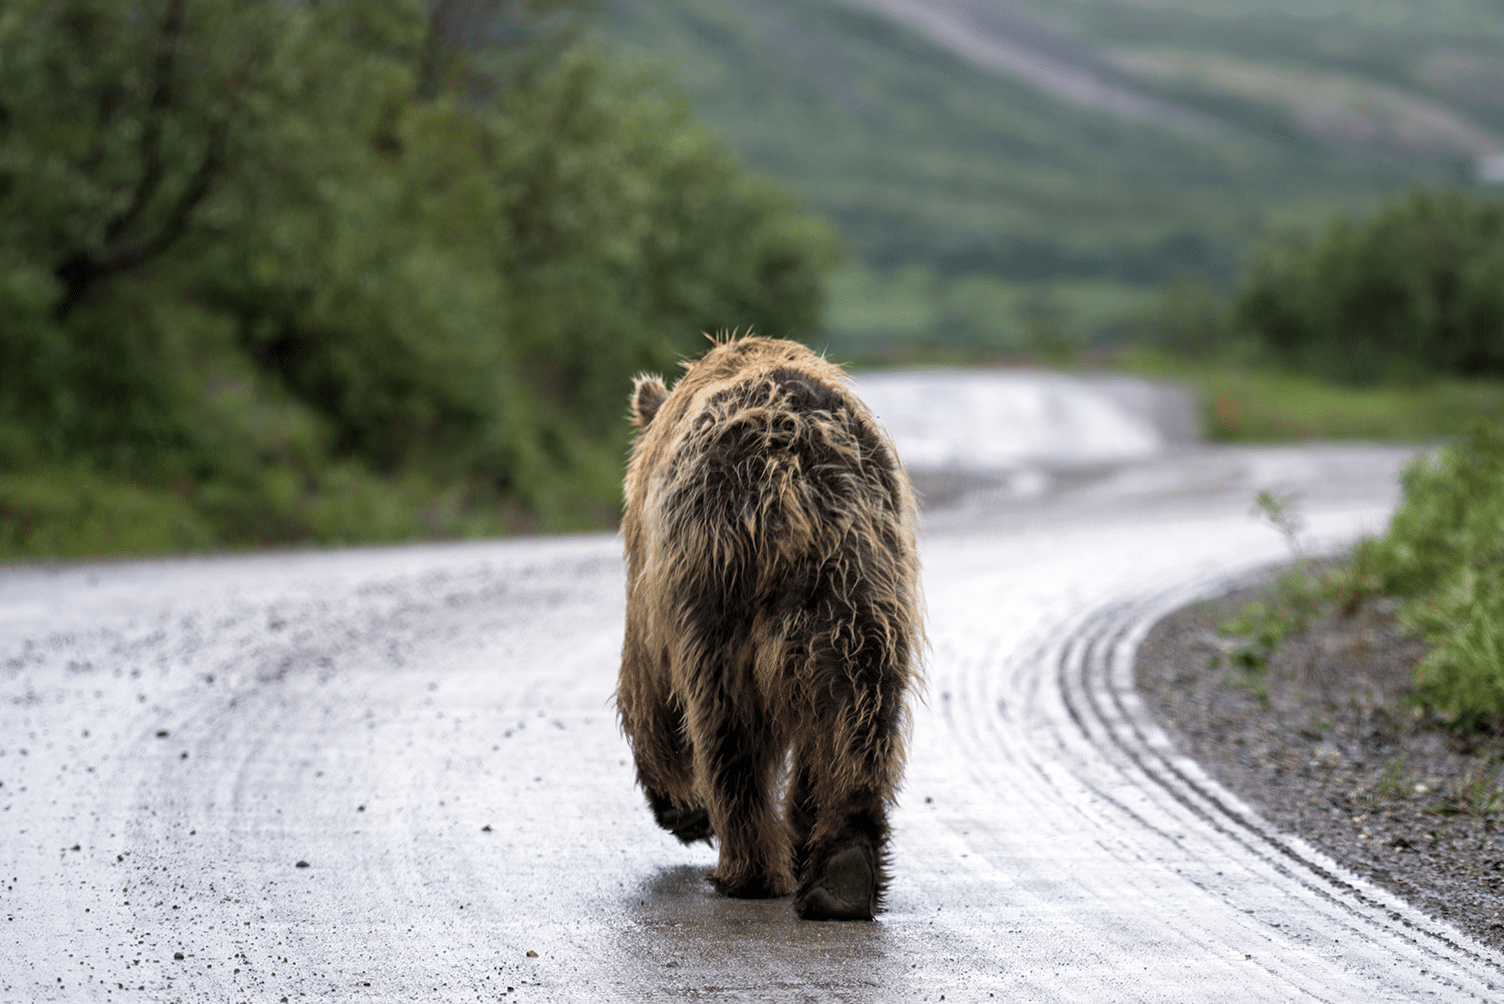 A grizzly bear walks down a road away form the camera.